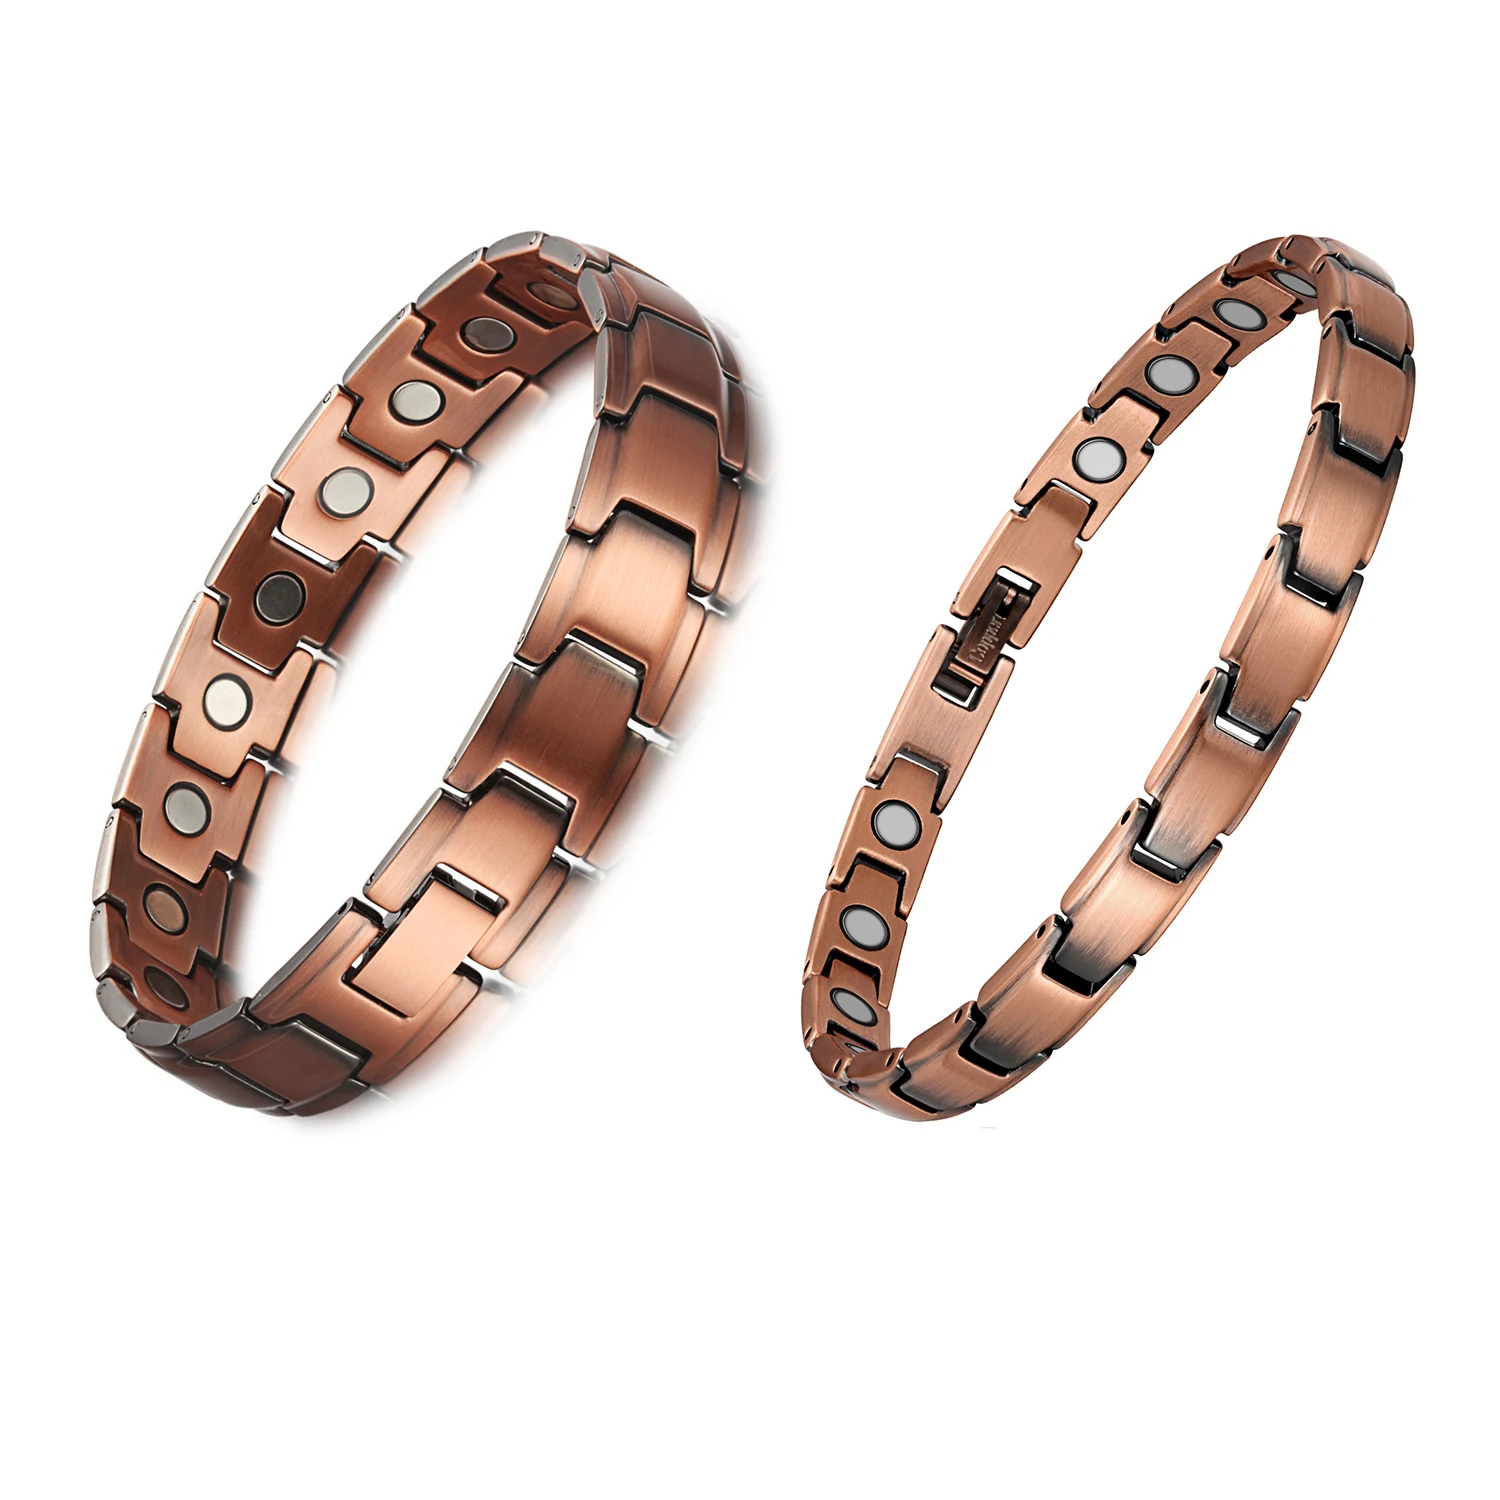 

Welmag Copper Bracelets for Women&Men Therapy Health Magnetic Healing Bracelet Bio Energy Arthritis Pain Valentine's Day Gifts